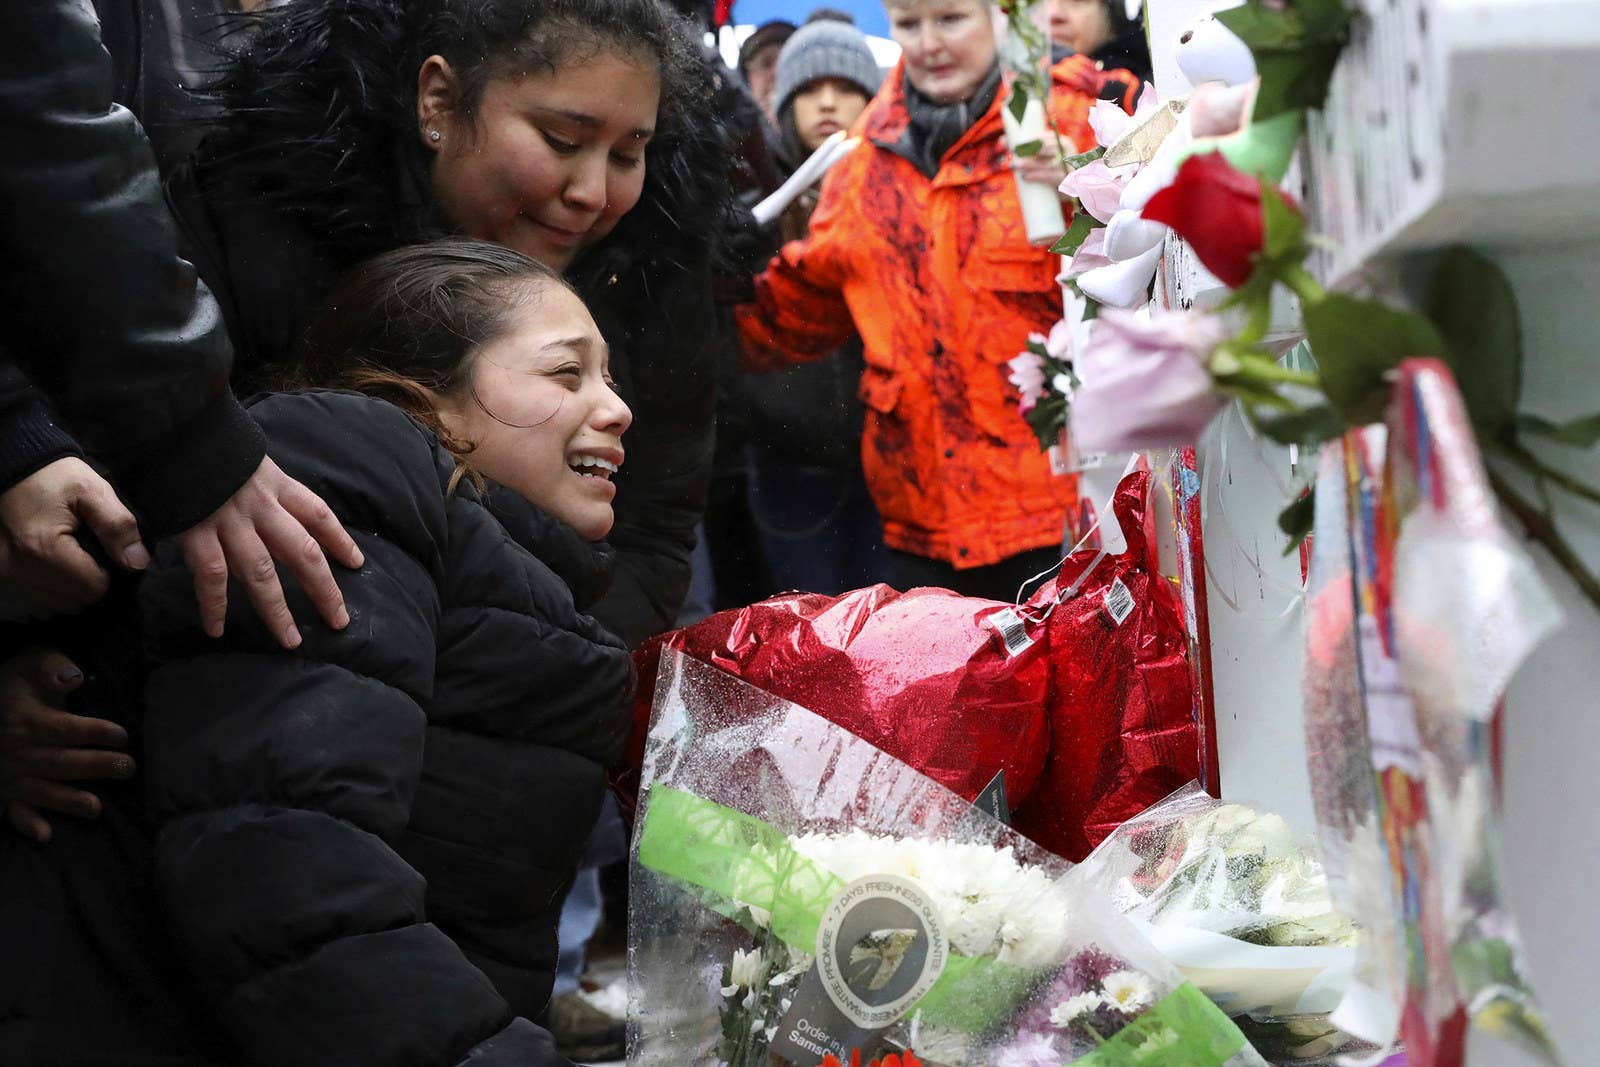 Vicente Juarez&#x27;s daughter, Diana Juarez, cries at a makeshift memorial on Feb. 17, in Aurora, Illinois, near the Henry Pratt manufacturing company facility, where her father and several others were killed last Friday by a gunman.